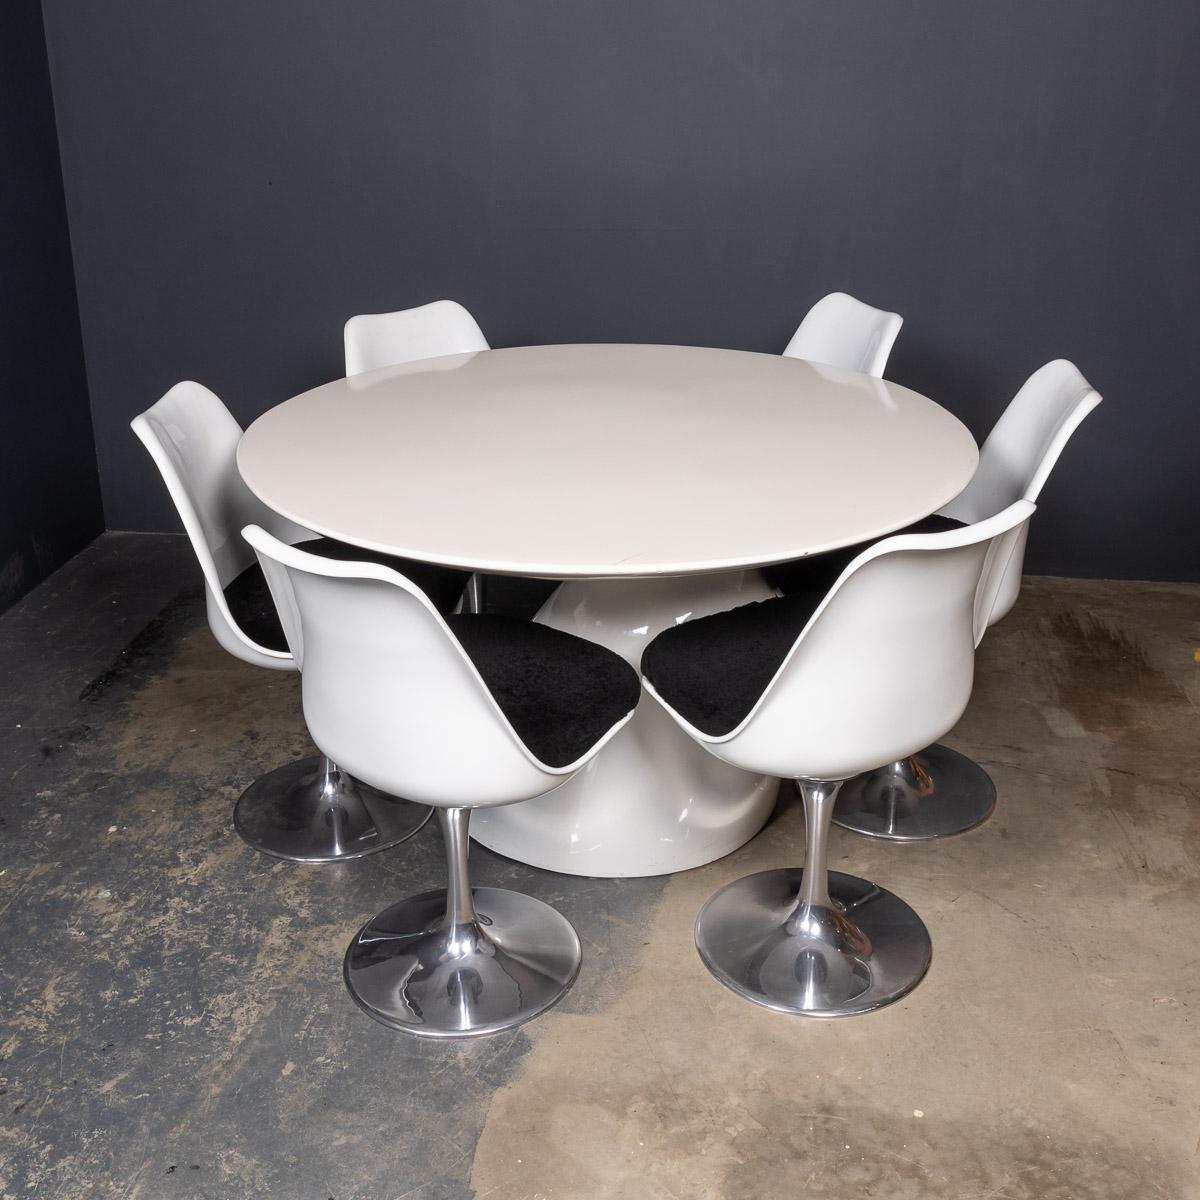 Modern mid-20th Century white lacquered fiberglass table on a large asymmetrical pedestal accompanied by a set of six complimentary Tulip swivel chairs in white lacquered fiberglass with an aluminum base and a contrasting, black shearling